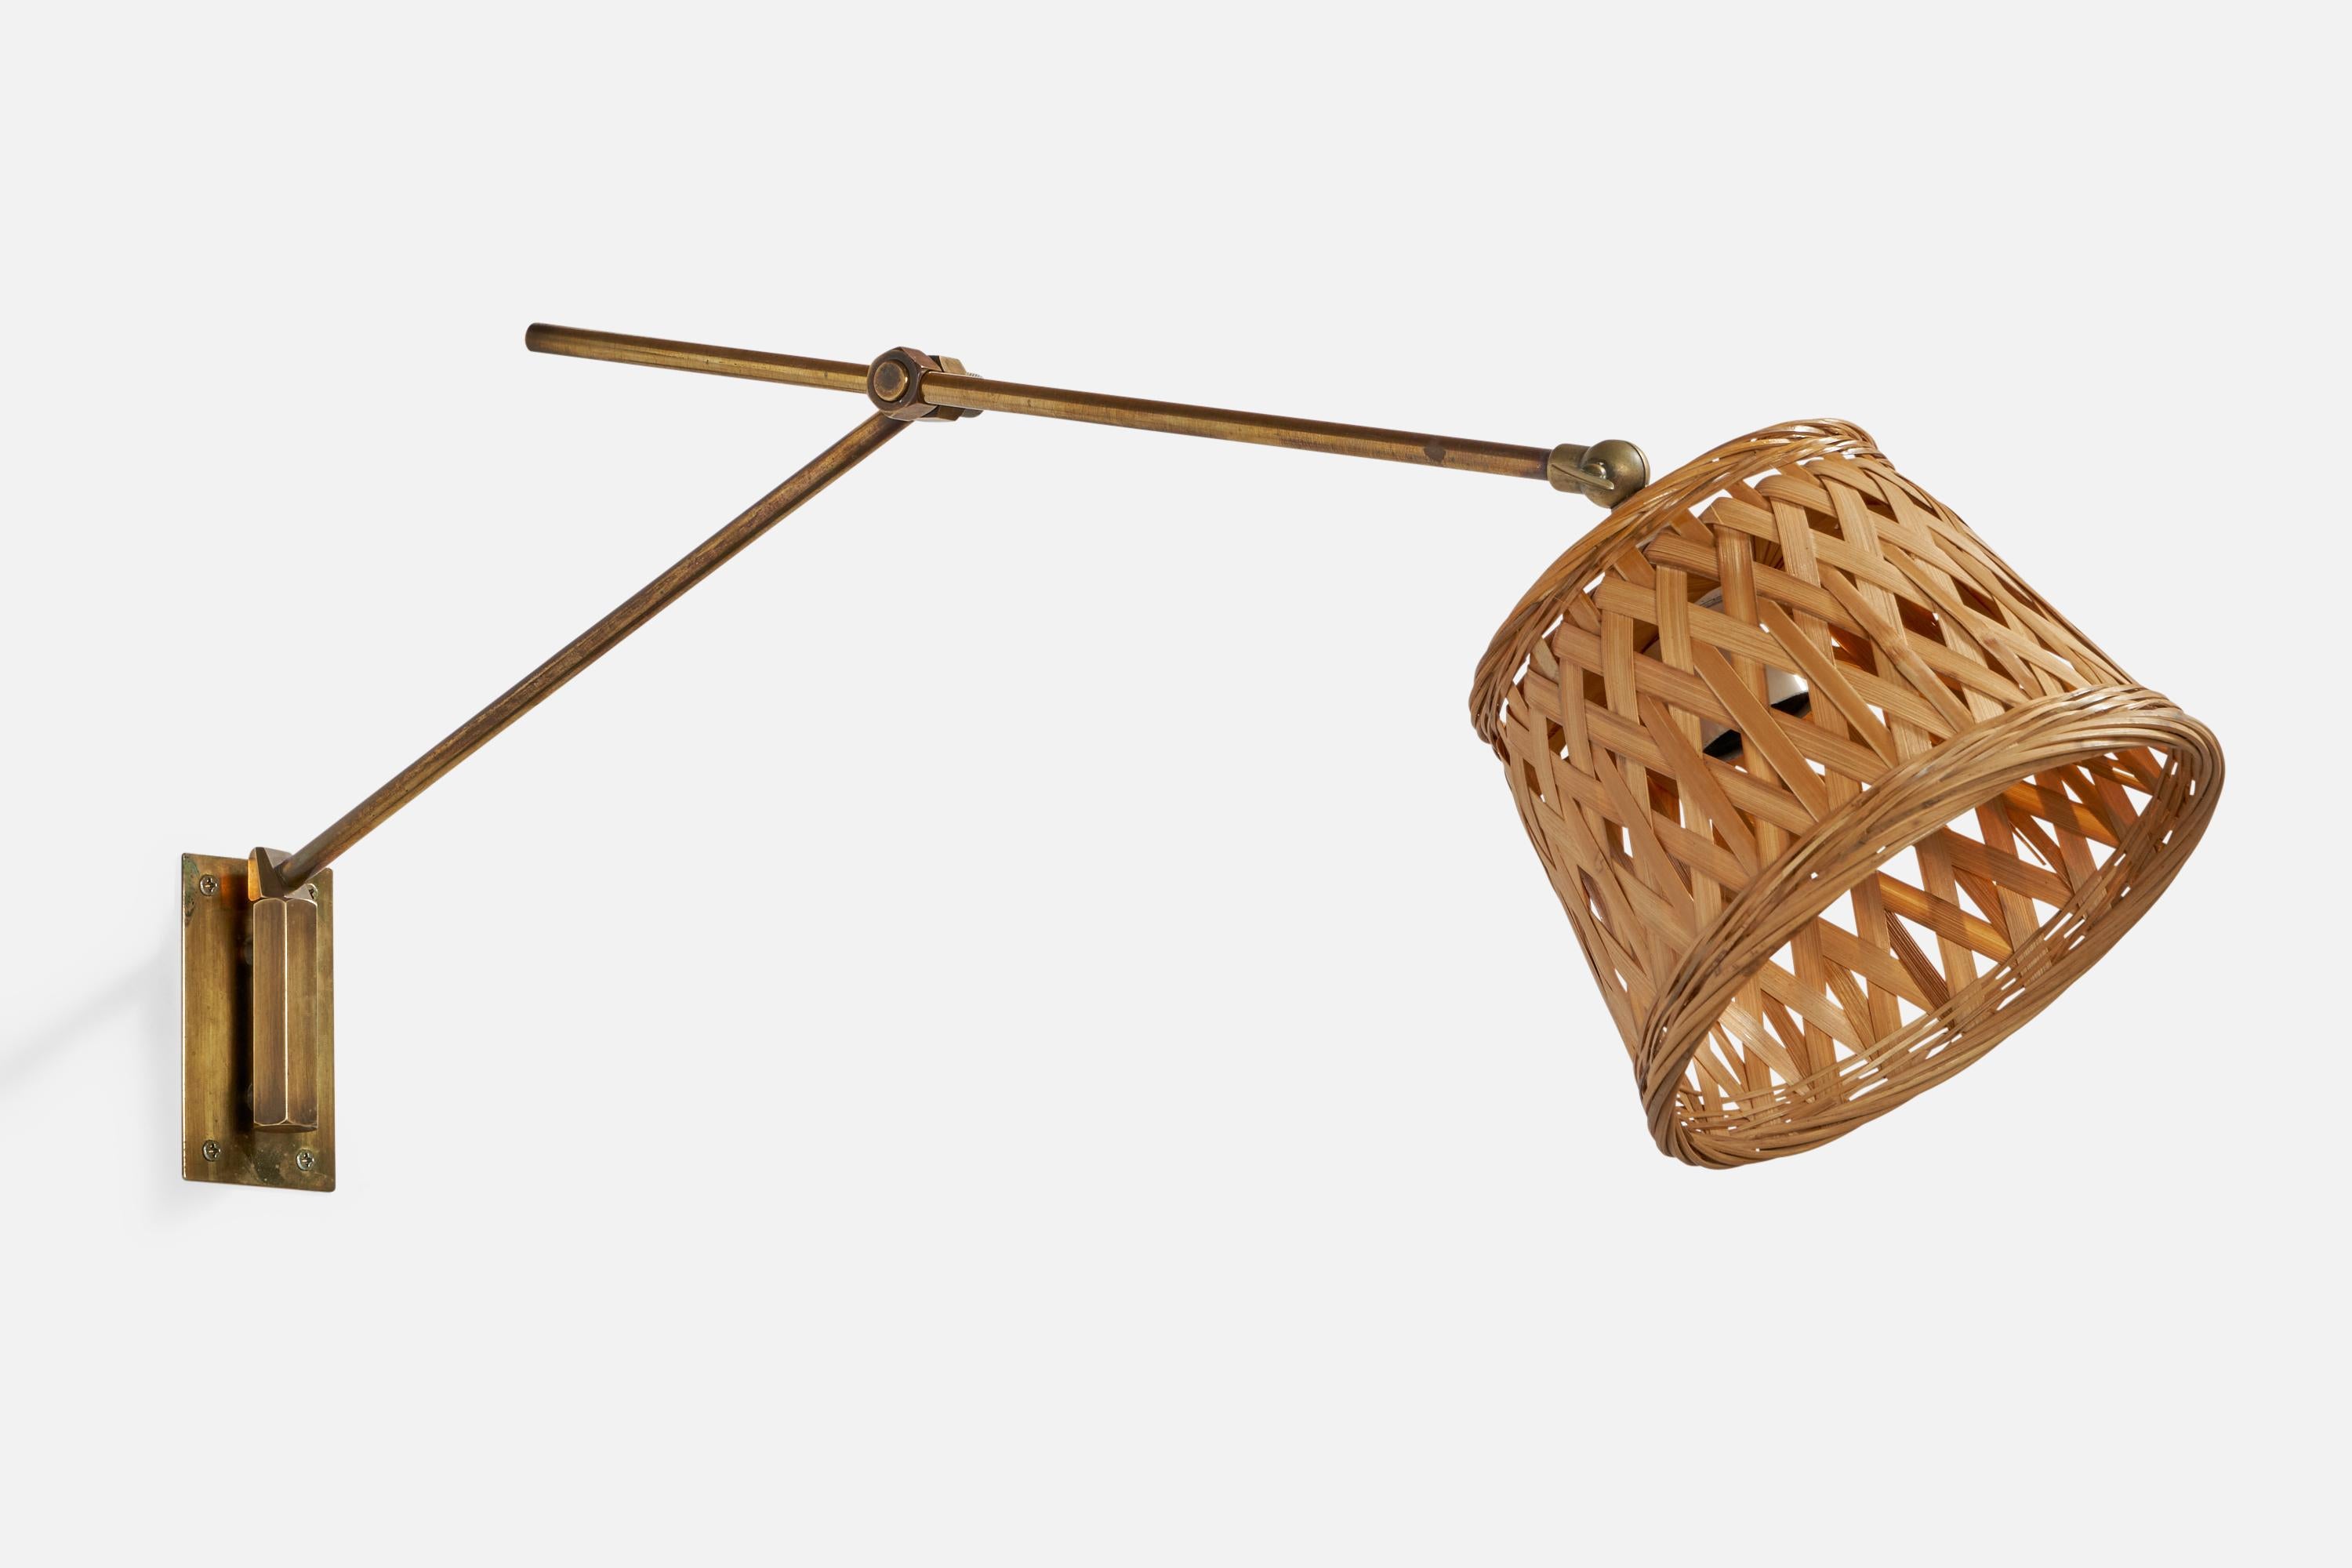 An adjustable brass and rattan wall designed and produced in Denmark, 1940s.

Please note cord feeds from stem connected to socket, configured for plug-in.

Overall Dimensions (inches): 9.15” H x 7.1” W x 25” D
dimensions adjustable based on